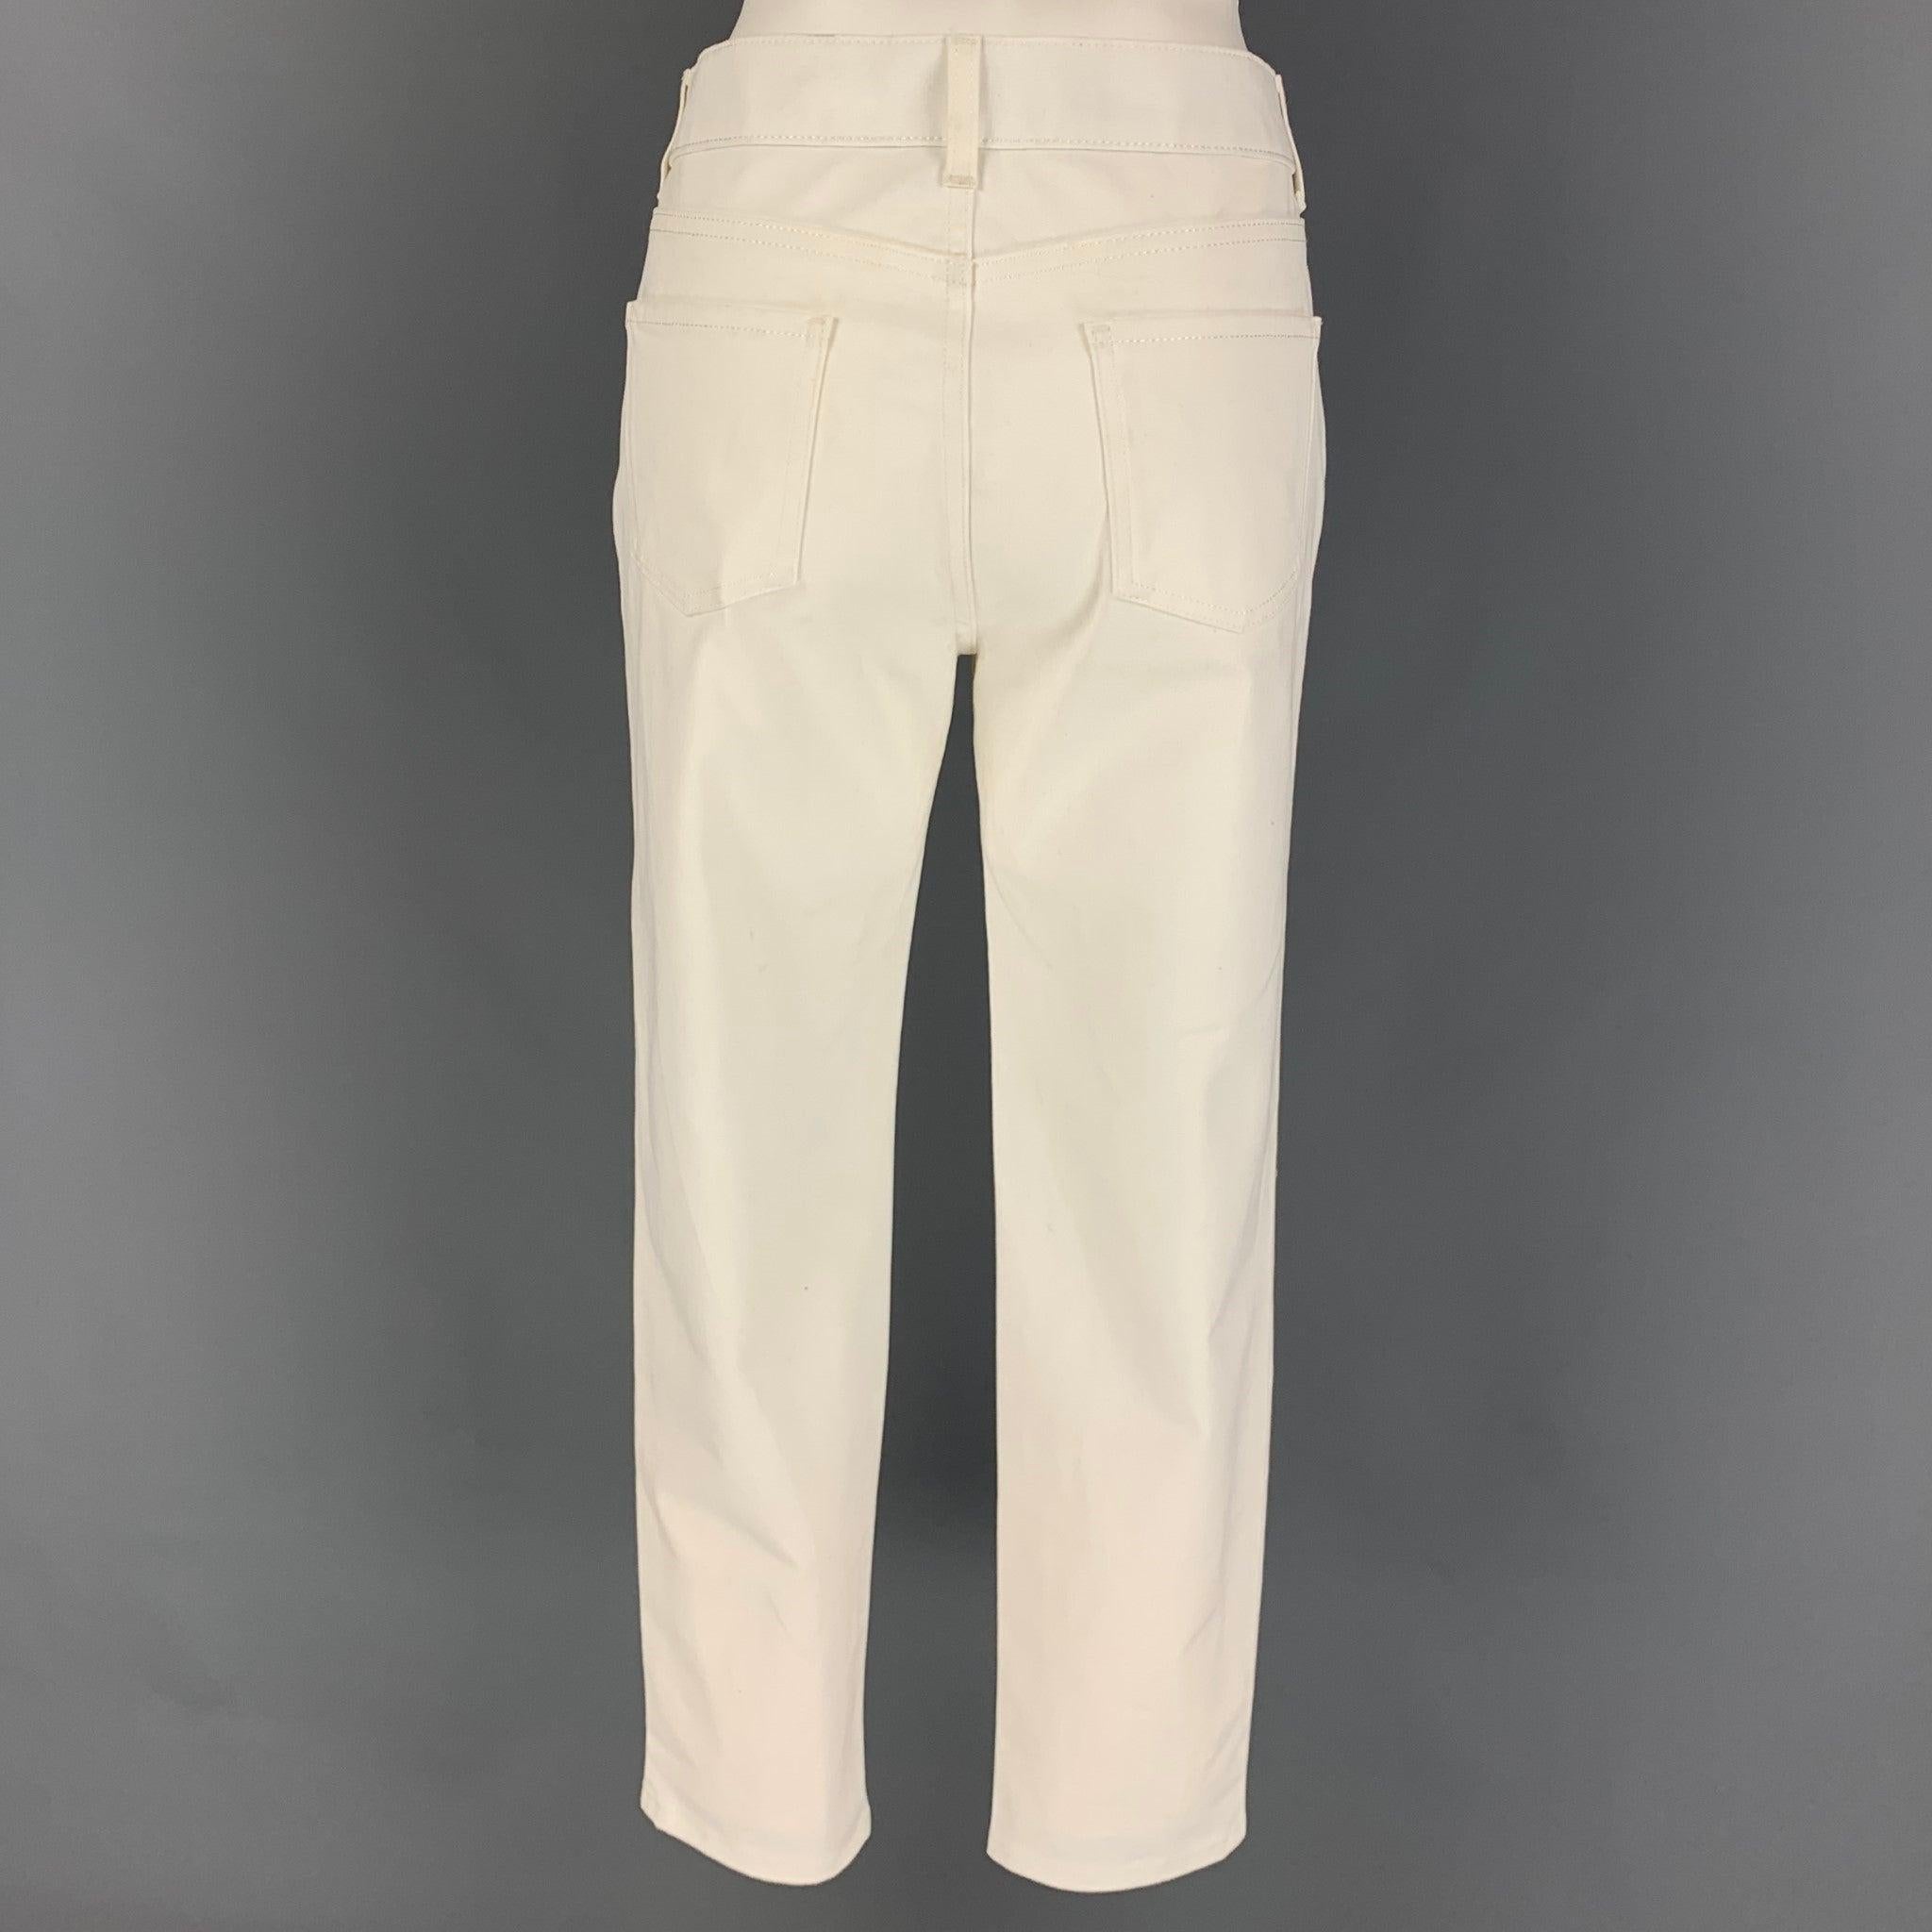 SALVATORE FERRAGAMO jeans comes in white cotton featuring a skinny fit, gold tone hardware, and a zip fly closure. Made in Italy.
New With Tags.
 

Marked:   42 

Measurements: 
  Waist: 32 inches  Rise: 10 inches  Inseam: 28 inches 
  
  
